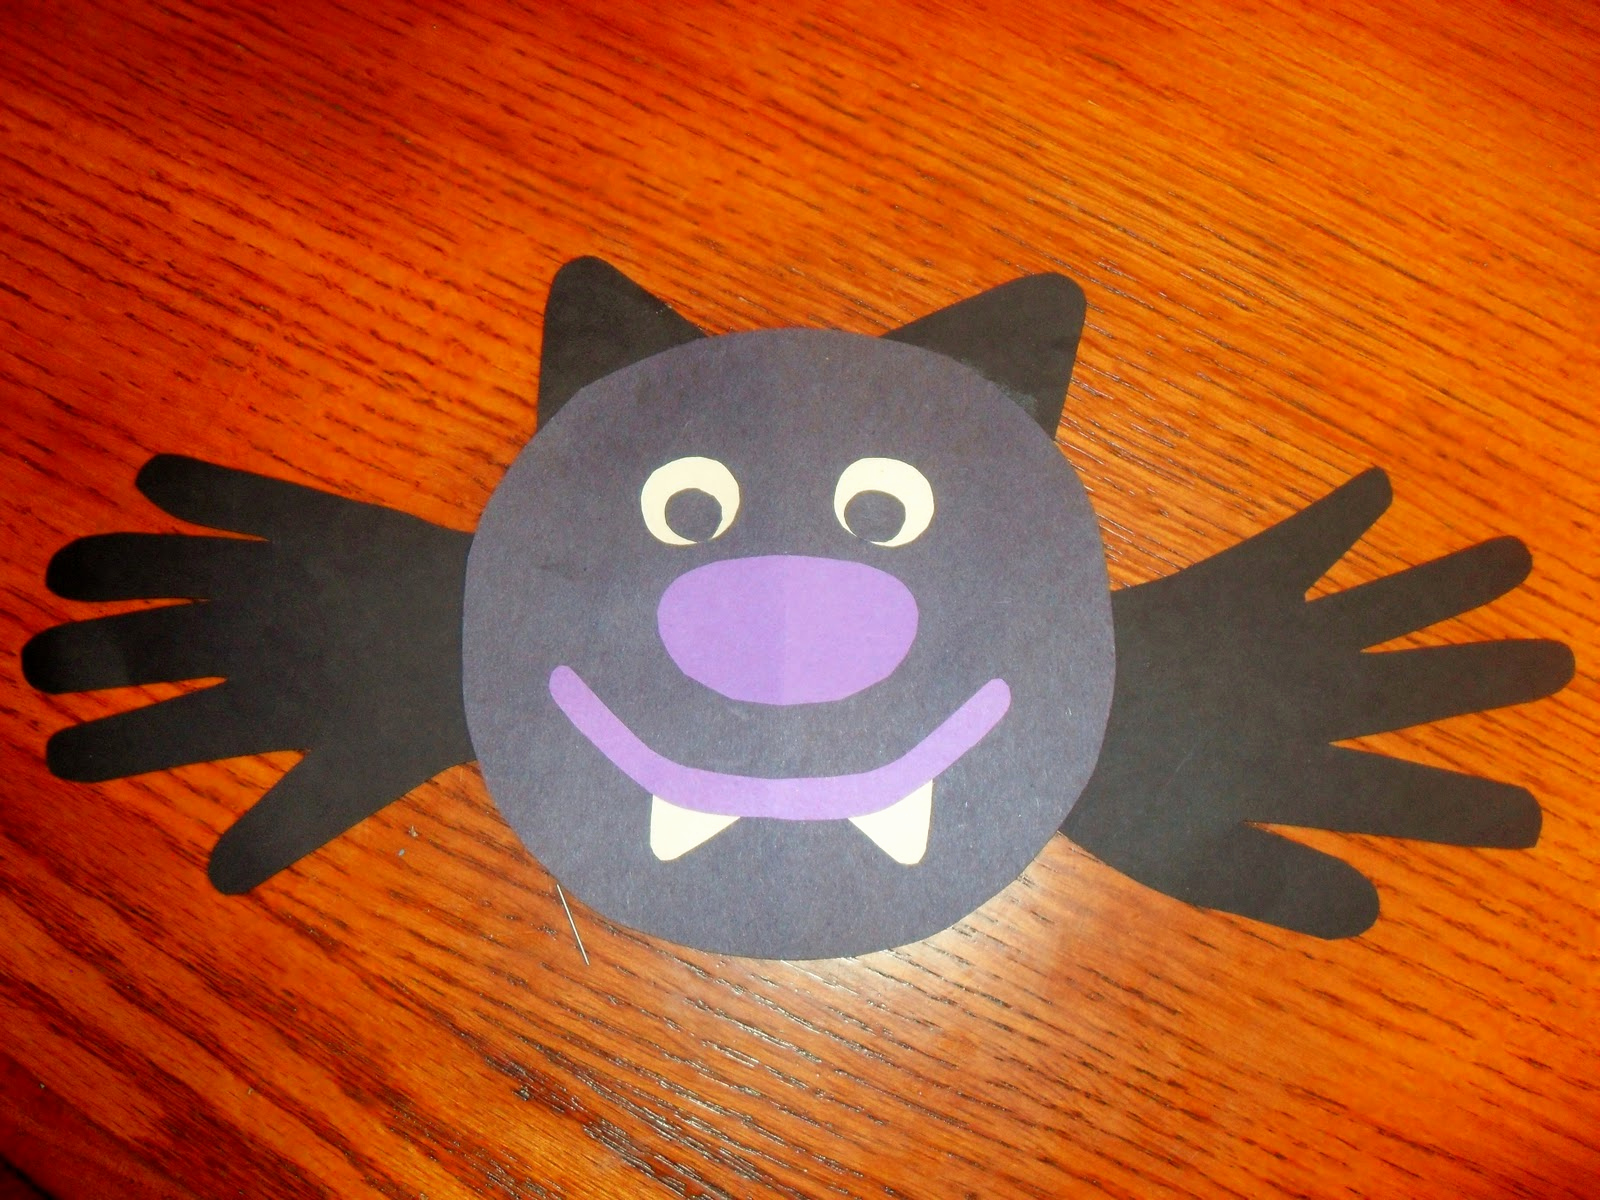 Construction Paper Crafts for Adults Awesome Adventures In Motherhood and Home Child Care Construction